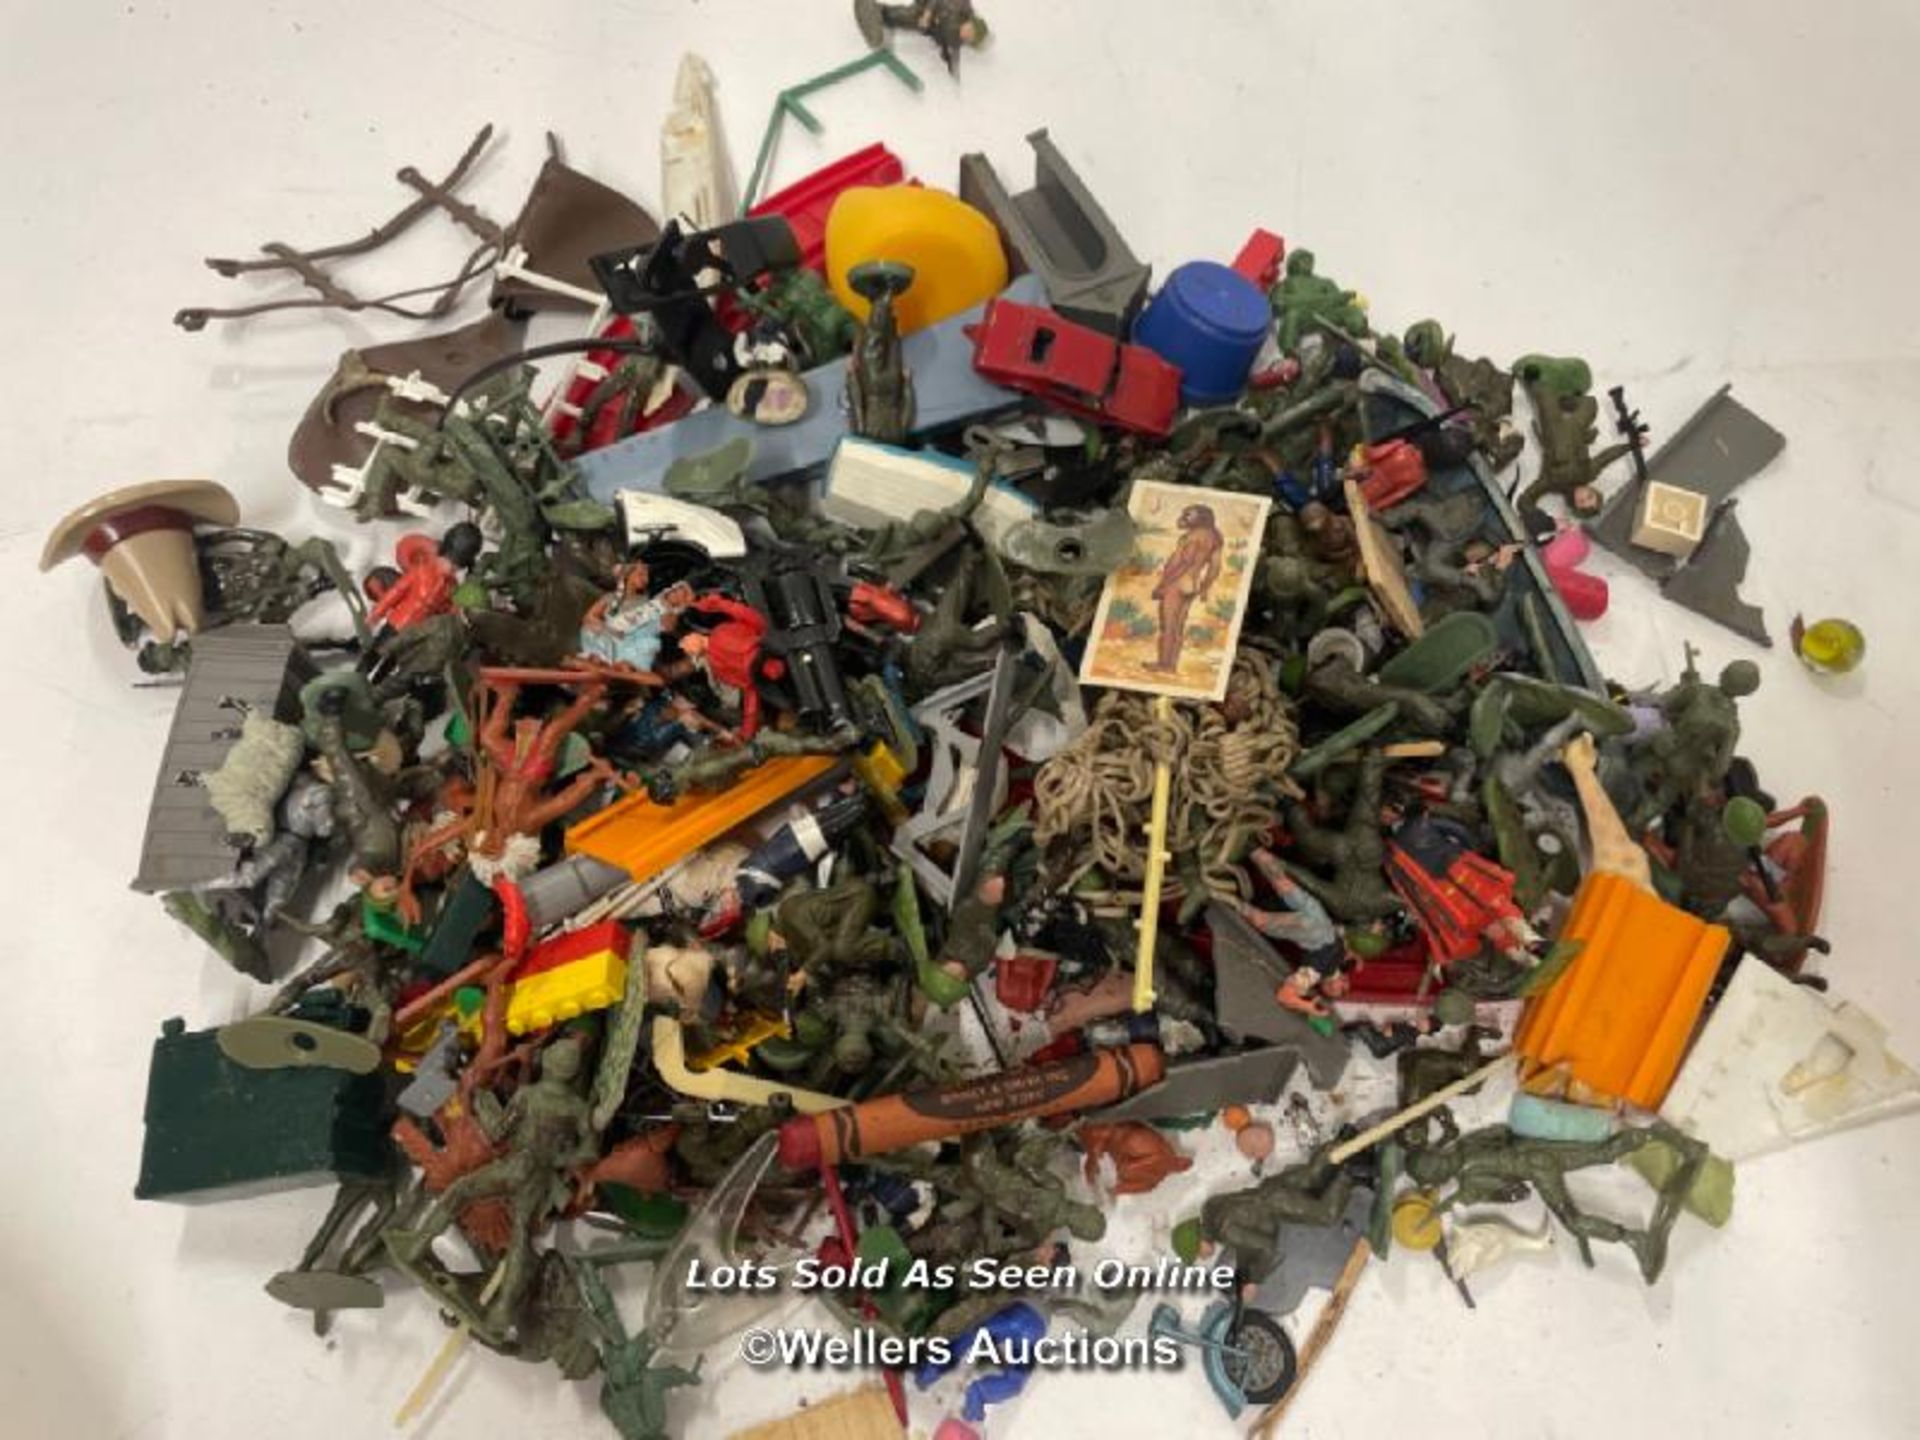 Mainly vintage plastic soldiers